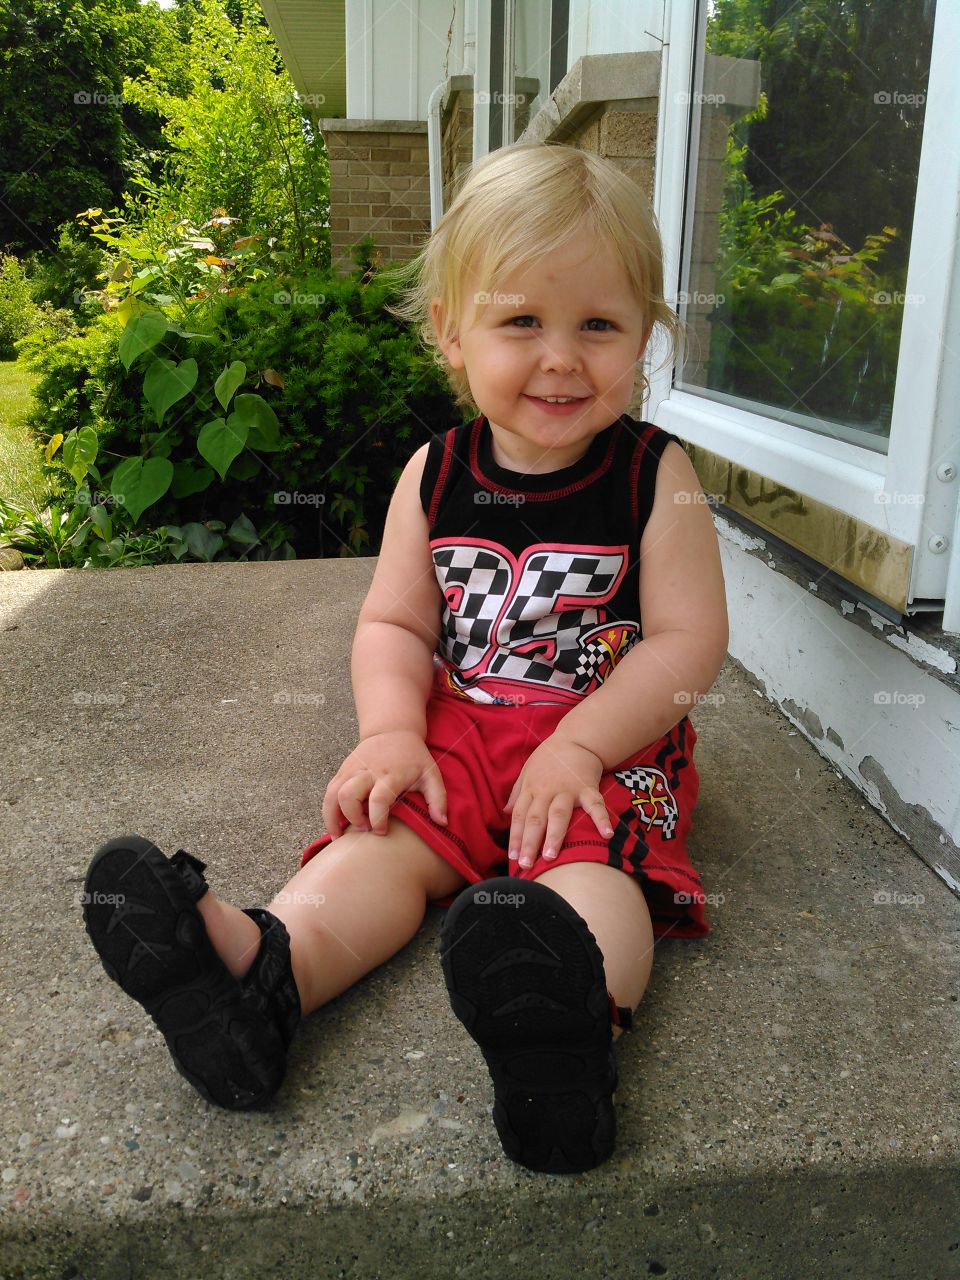 Disney cars outfit... all smiles!!!